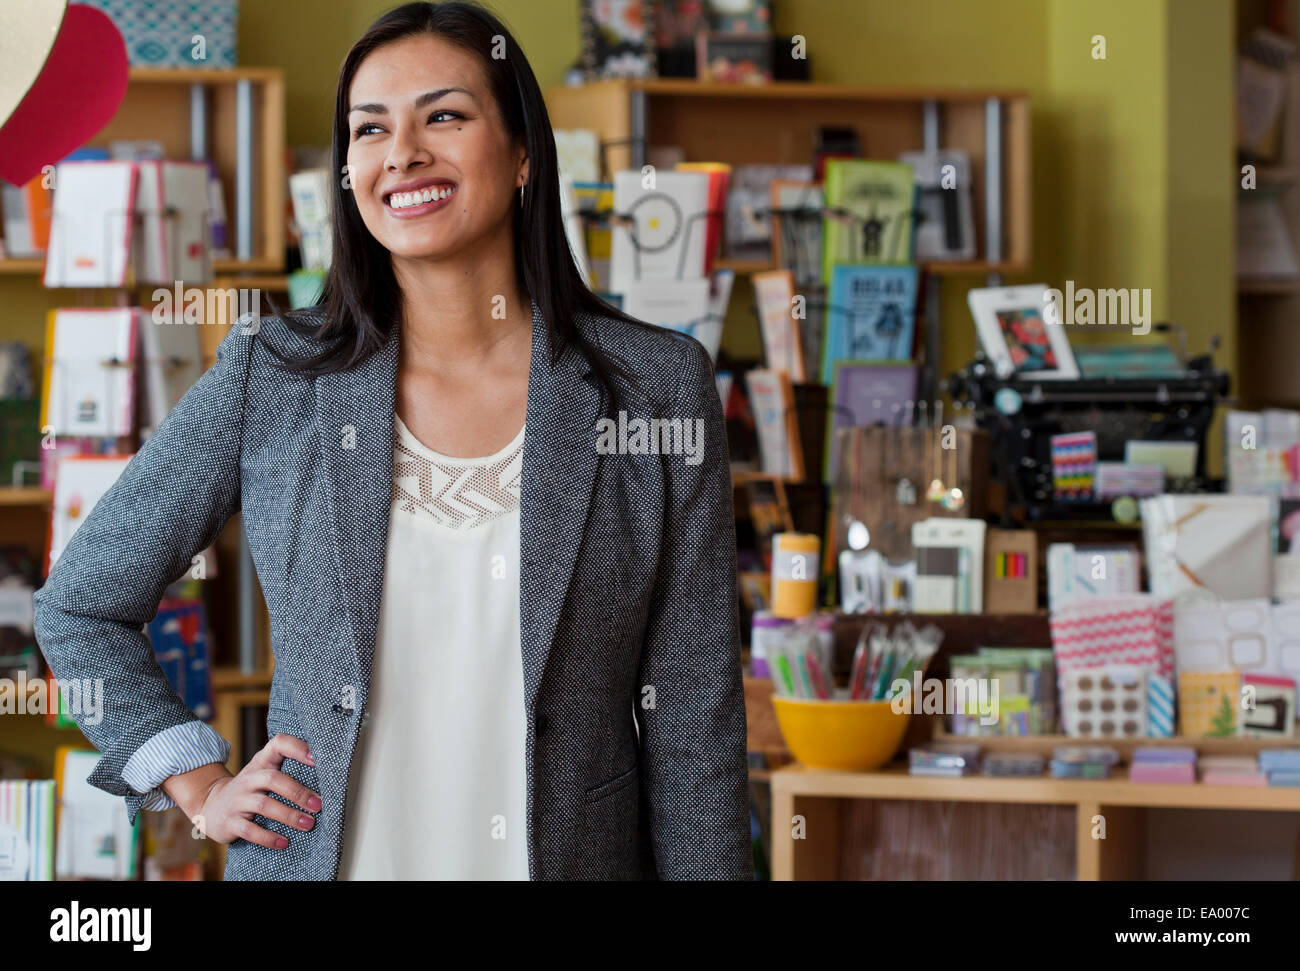 Portrait of female sales assistant in stationery shop Stock Photo